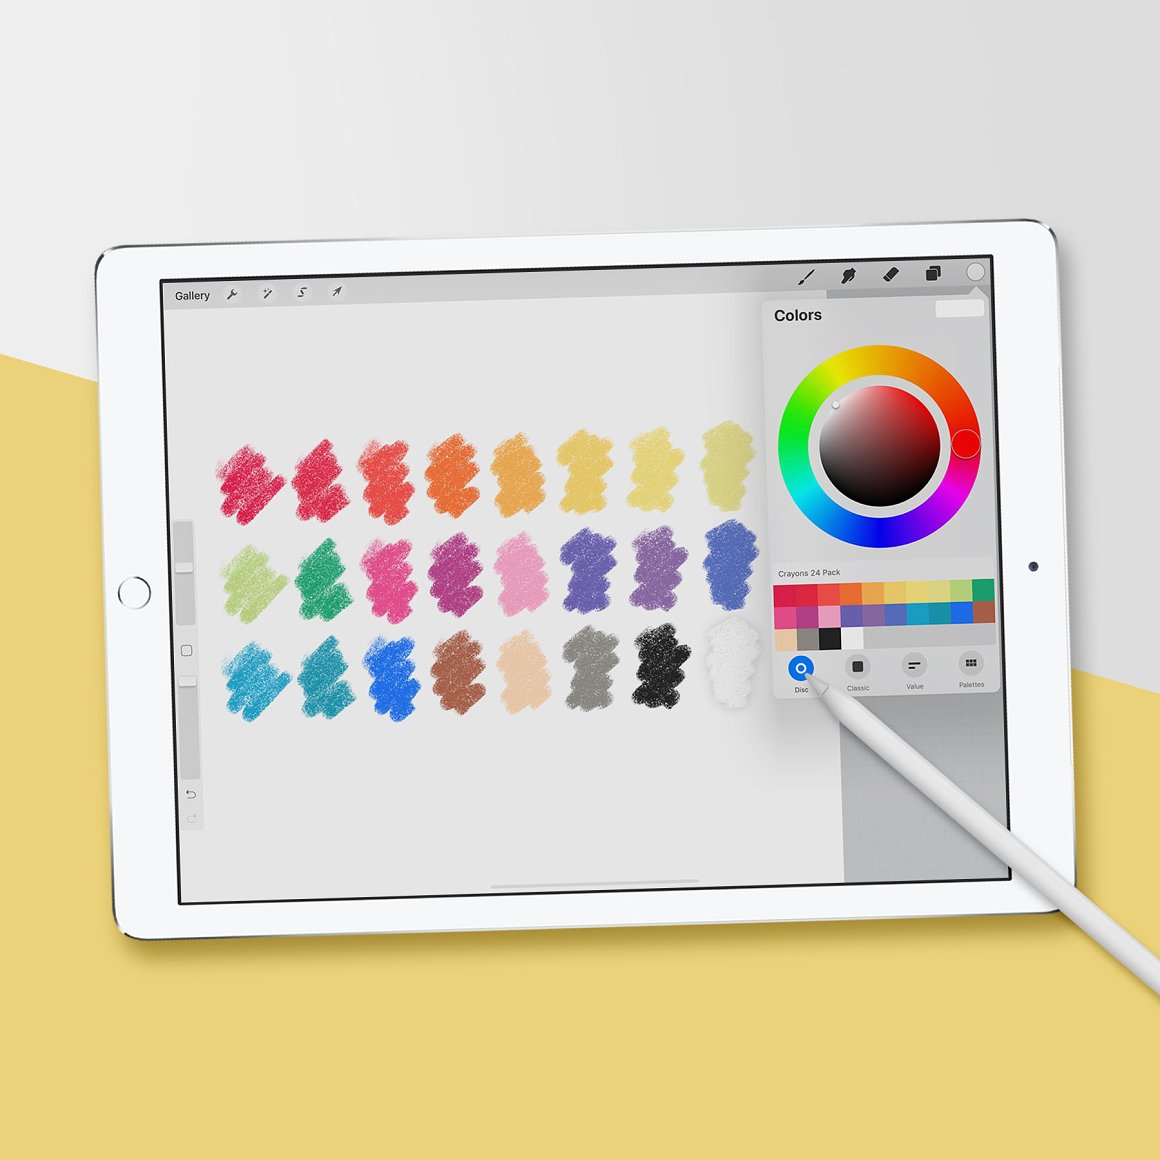 Mockup Ipad with color palette of 24 crayon brushes.